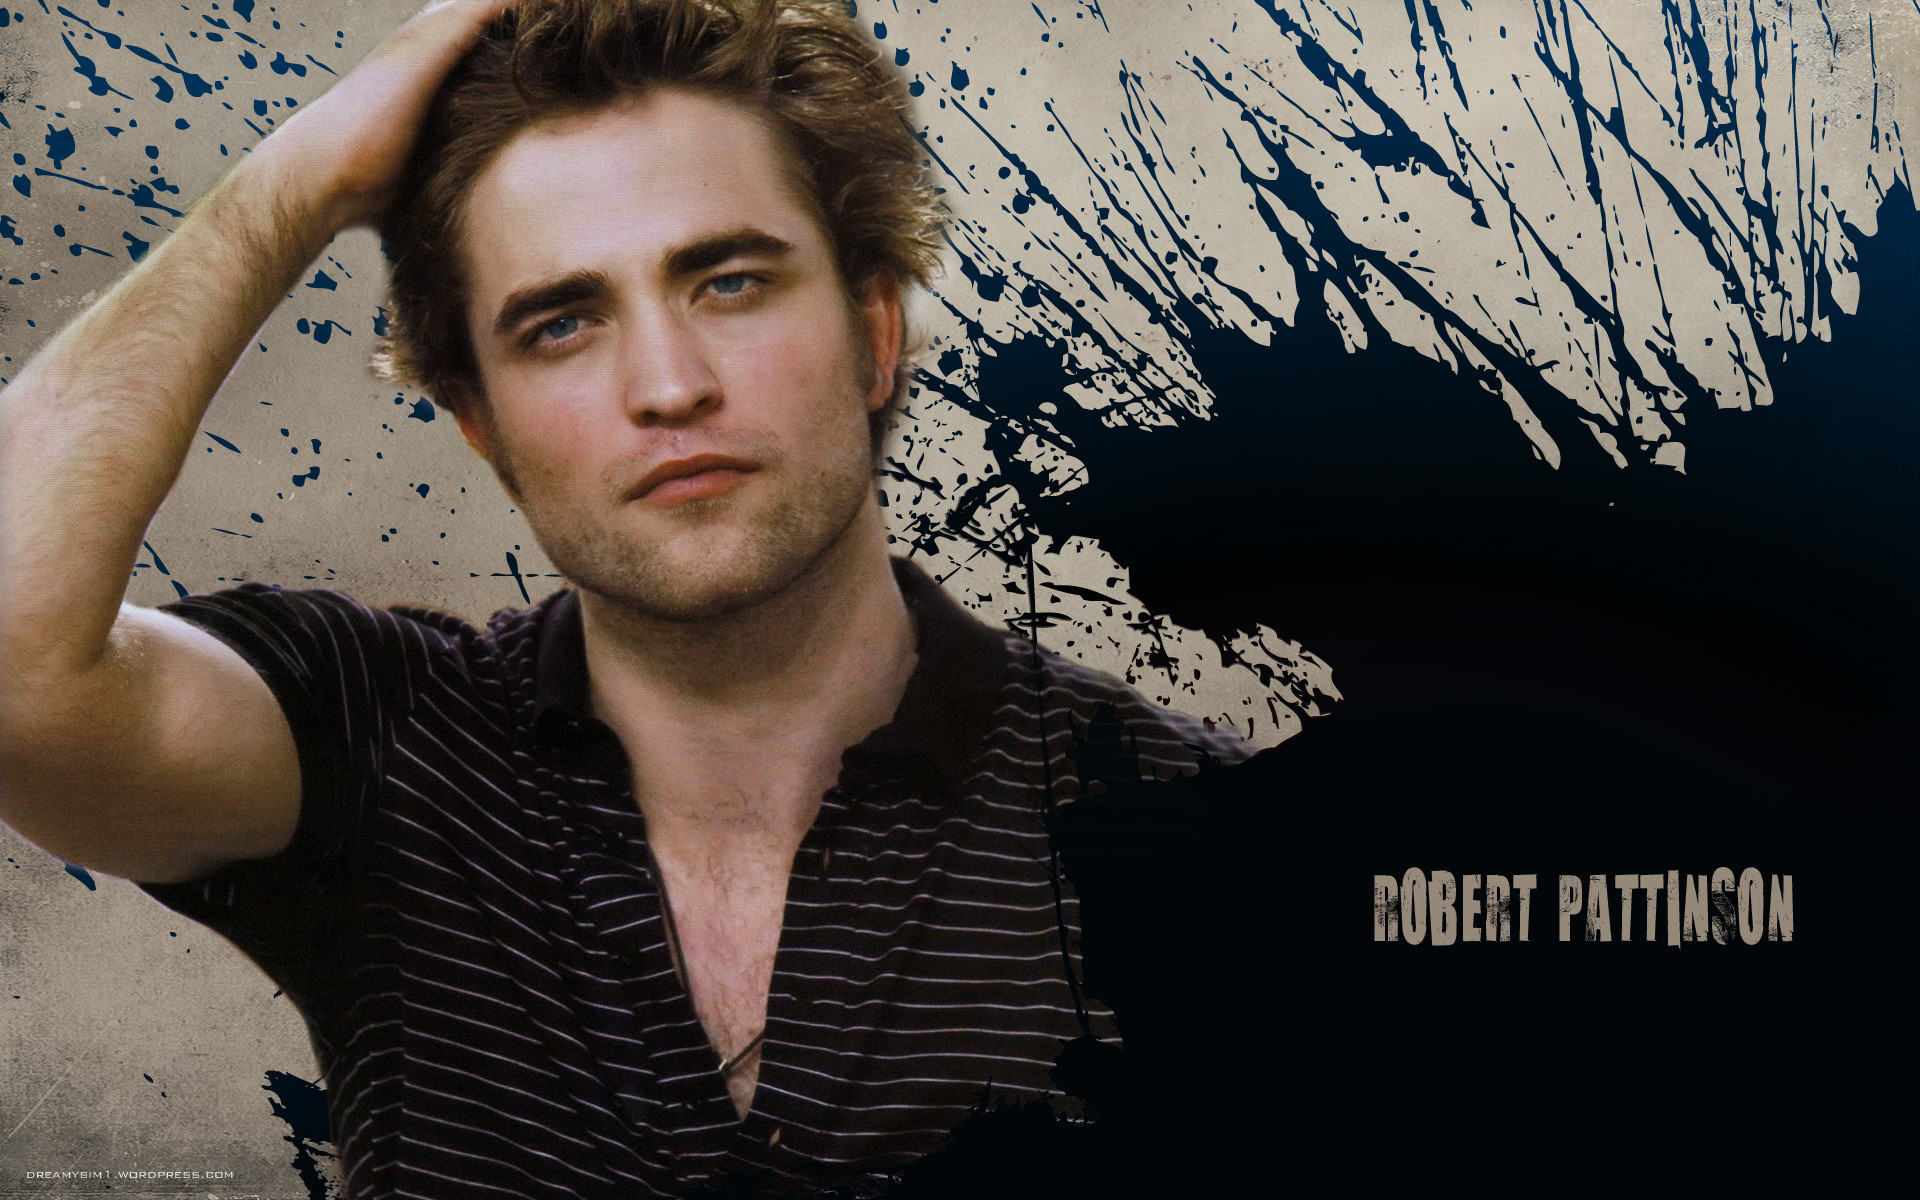 1920x1200 2543x1536 Download Robert Pattinson New 1080p Full HD Wallpapers, Robert  Pattinson Best New Hairstyle and new look hd photos, Robert Pattinson  latest movies ...